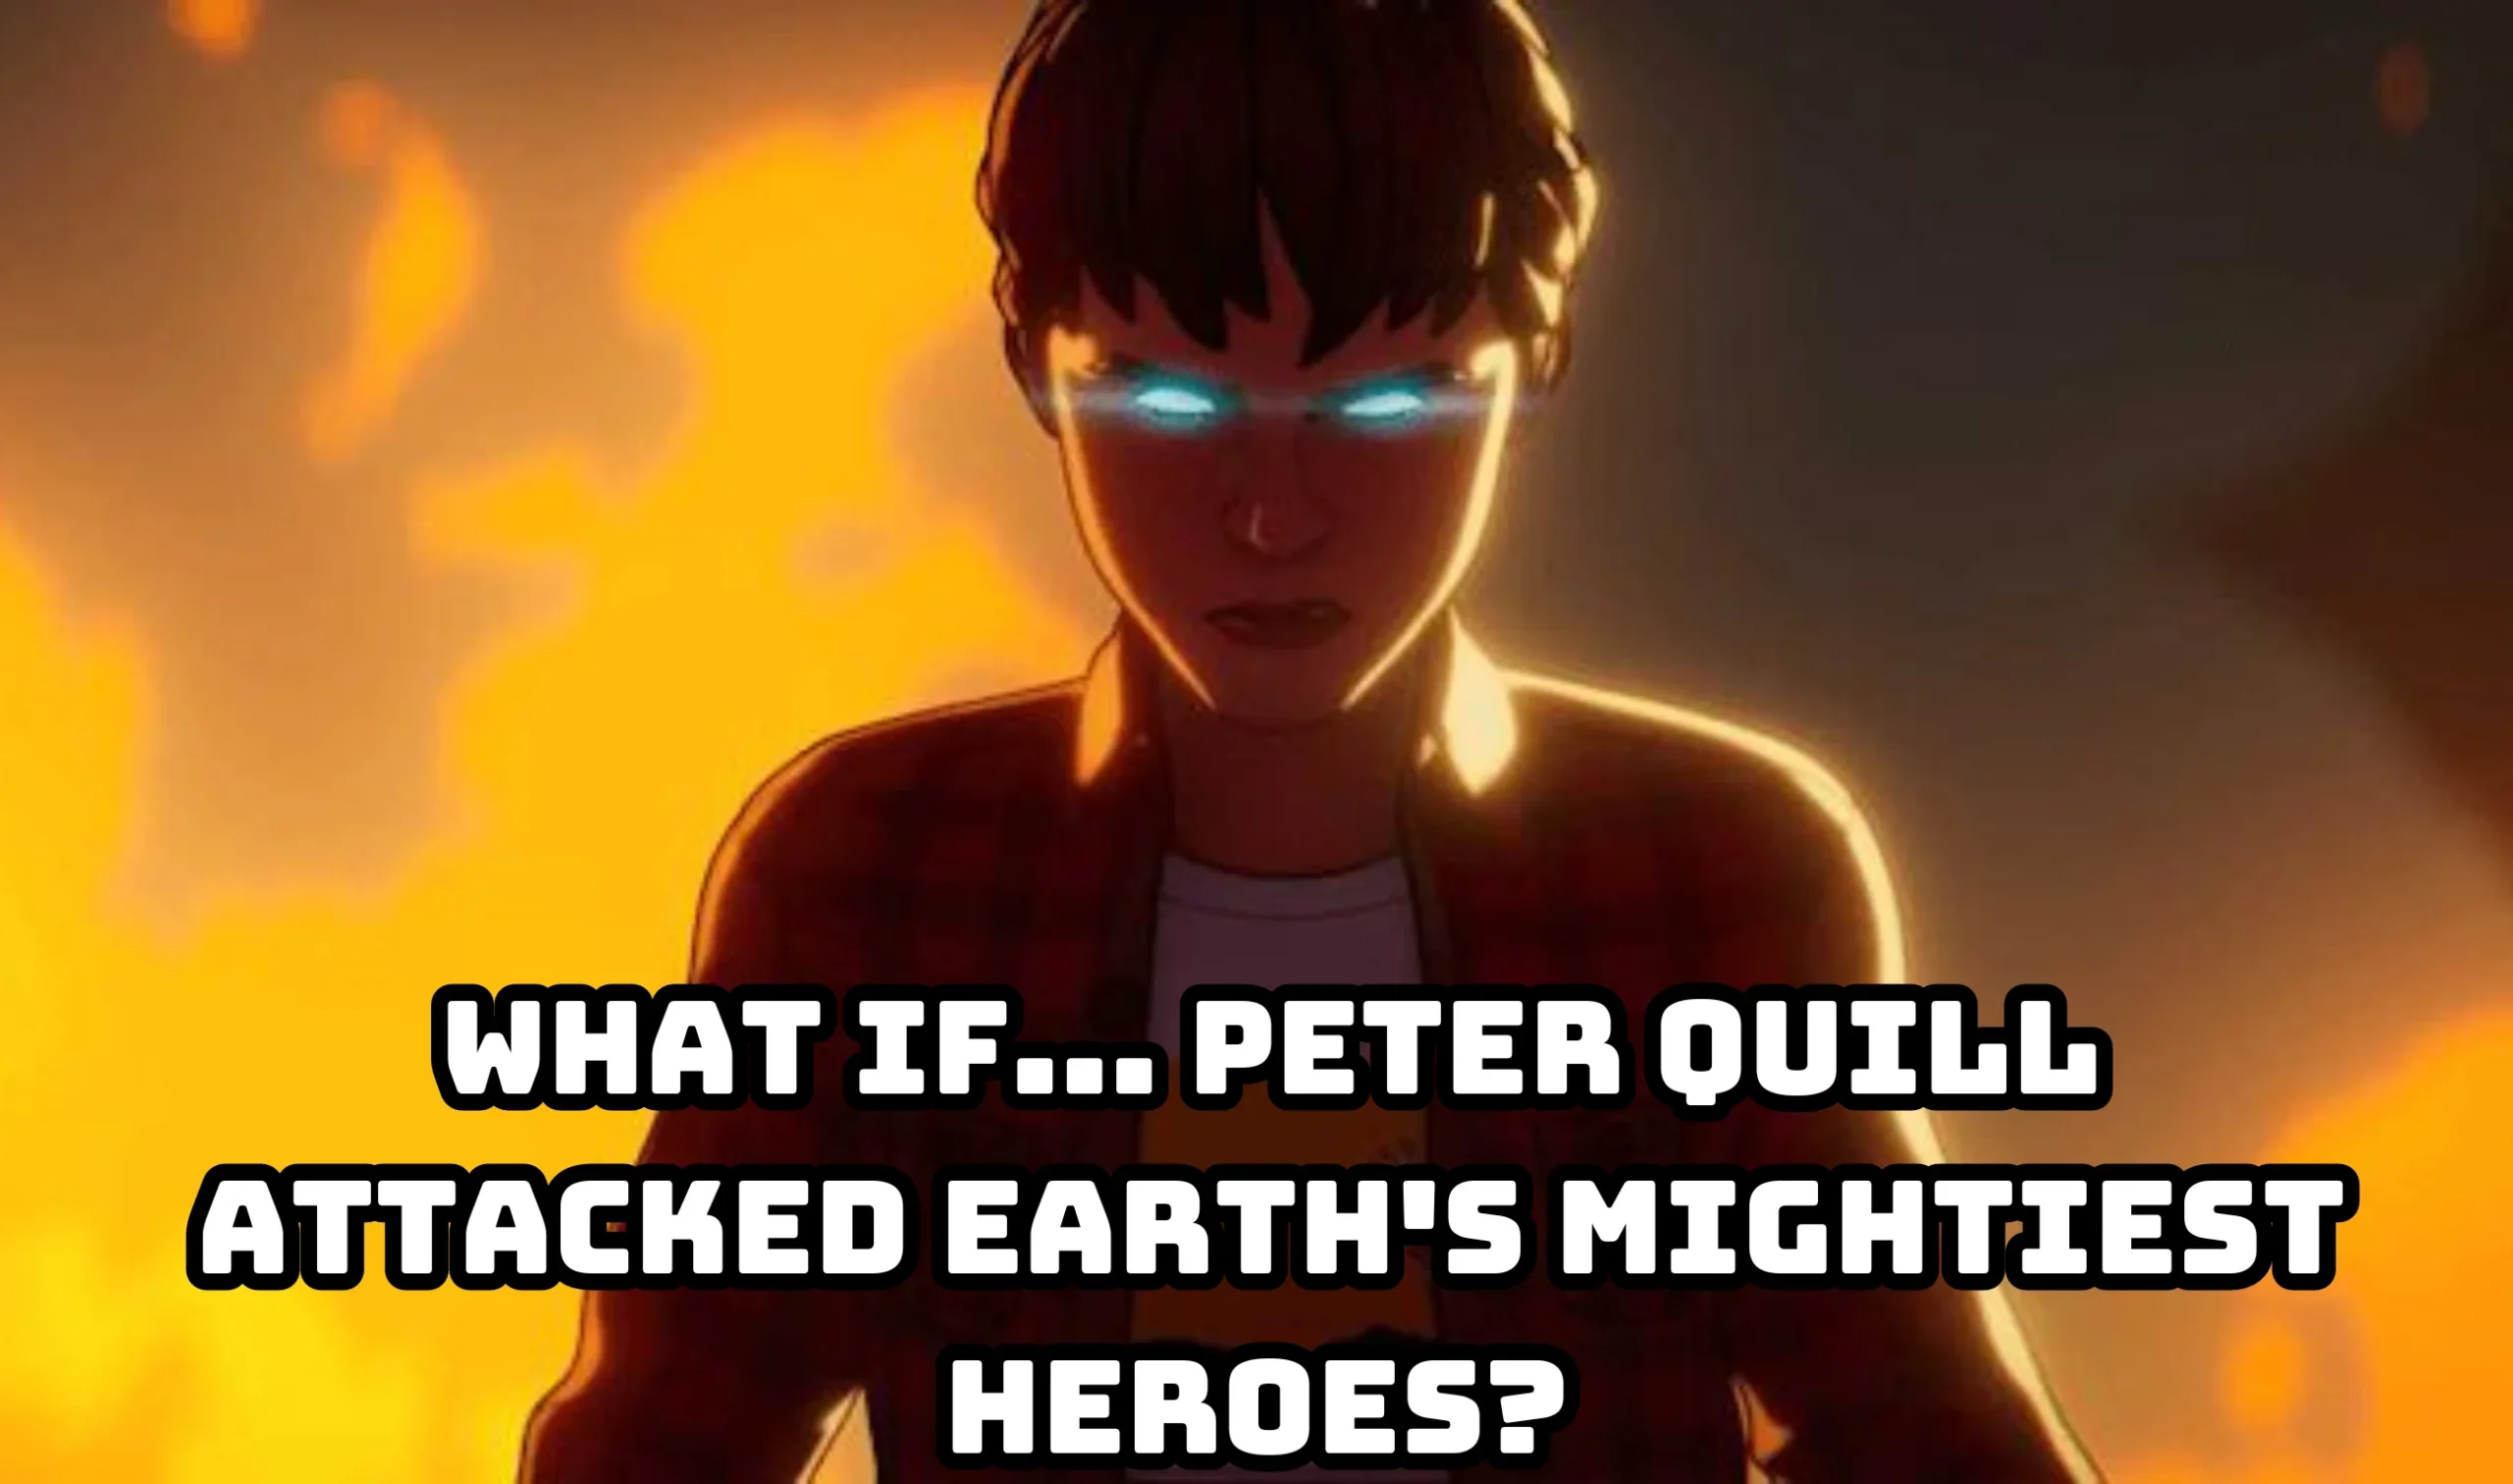 What If Season 2 Episode 2 Review: Peter Quill Attacked Earth’s Mightiest Heroes?